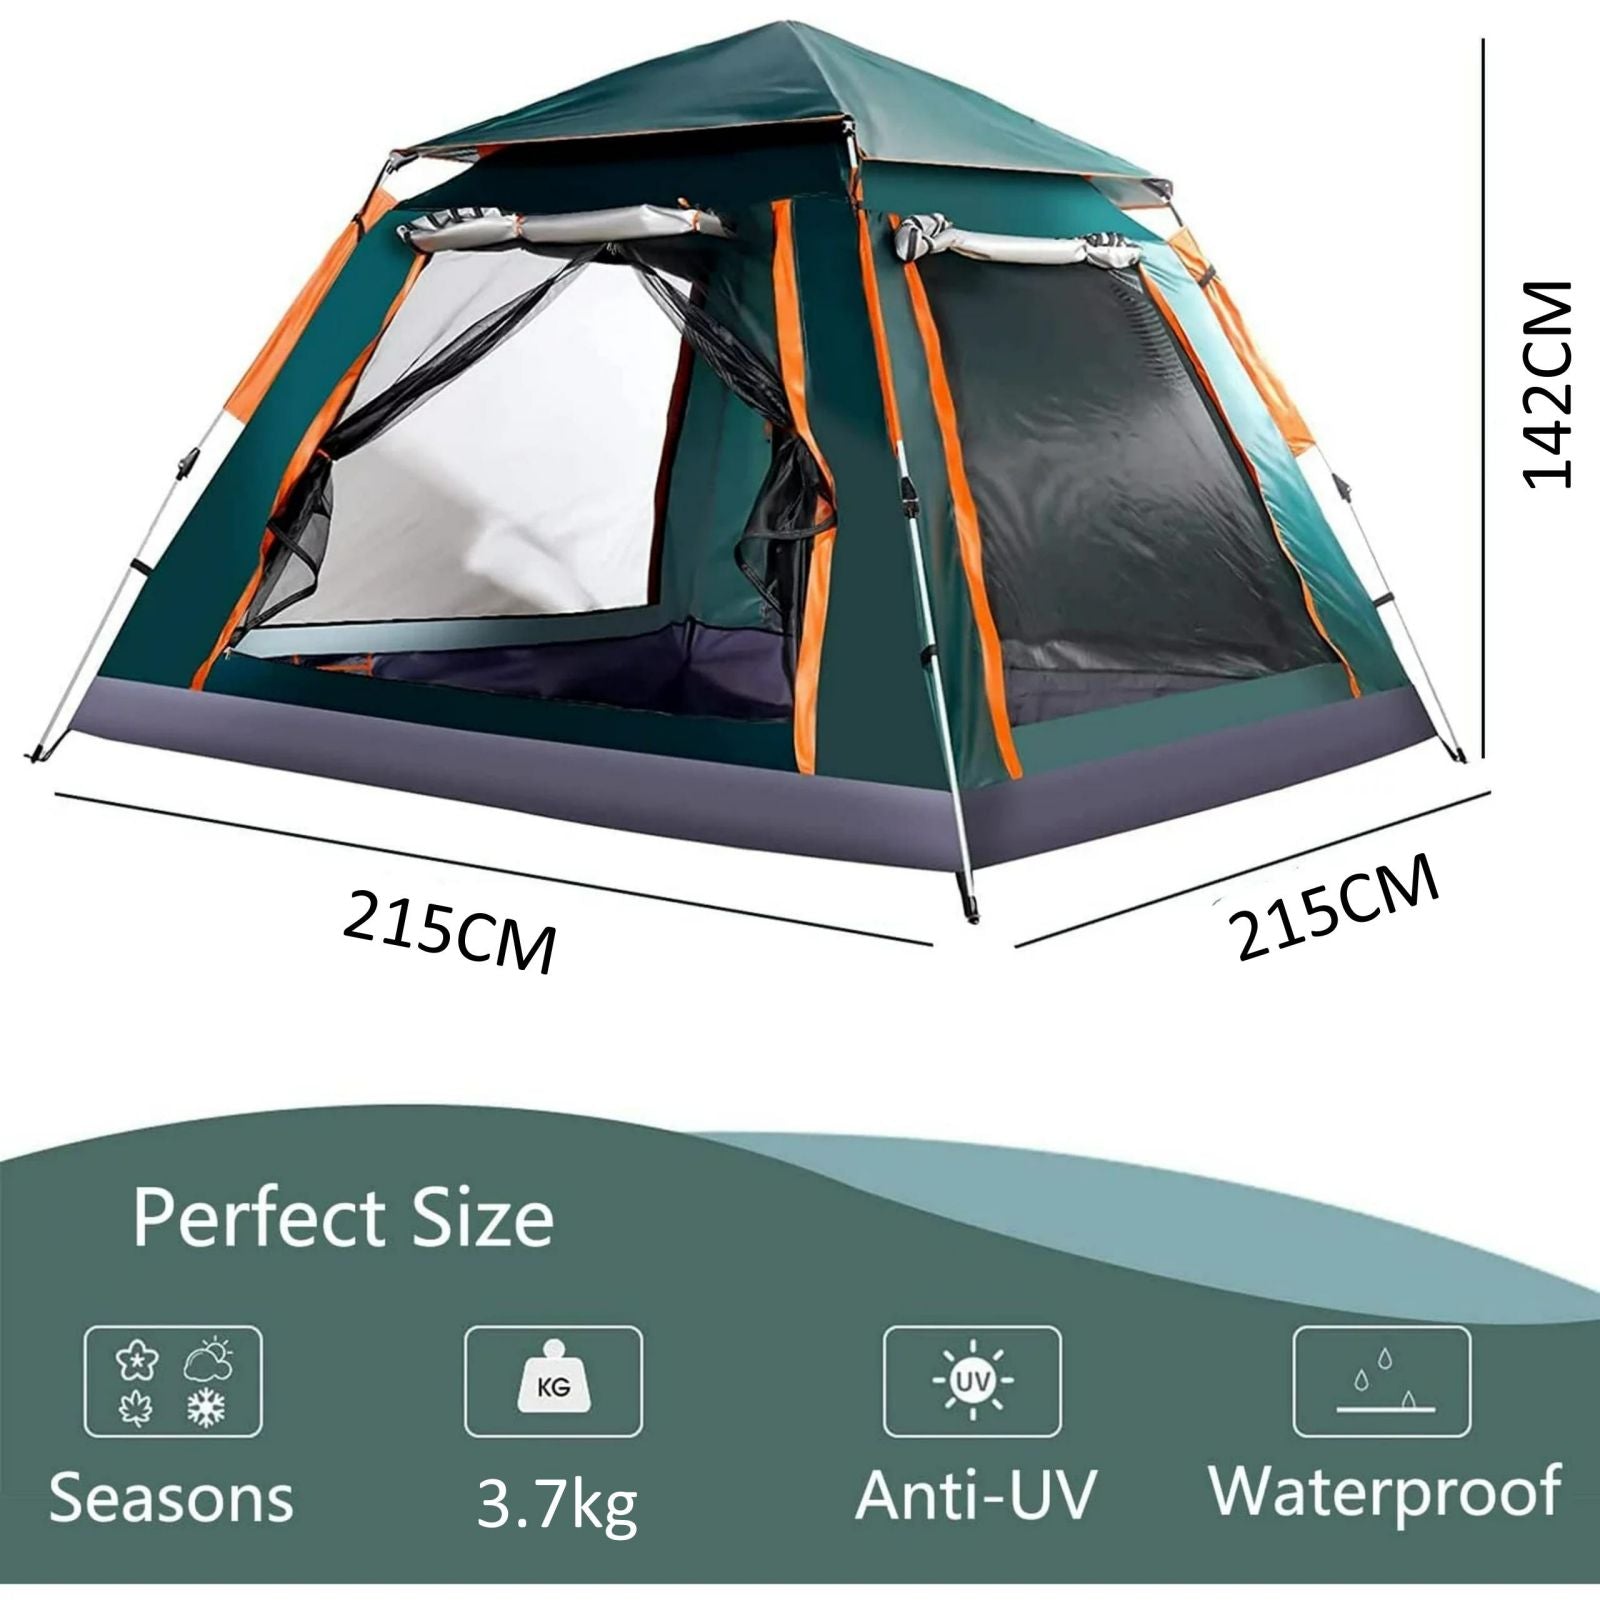 Instant Pop Up Tent for Hiking 2/3/4 Person Camping Tents, Waterproof Windproof Family Tent with Top Rainfly, Easy Set Up, Portable with Carry Bag, with UV Protection